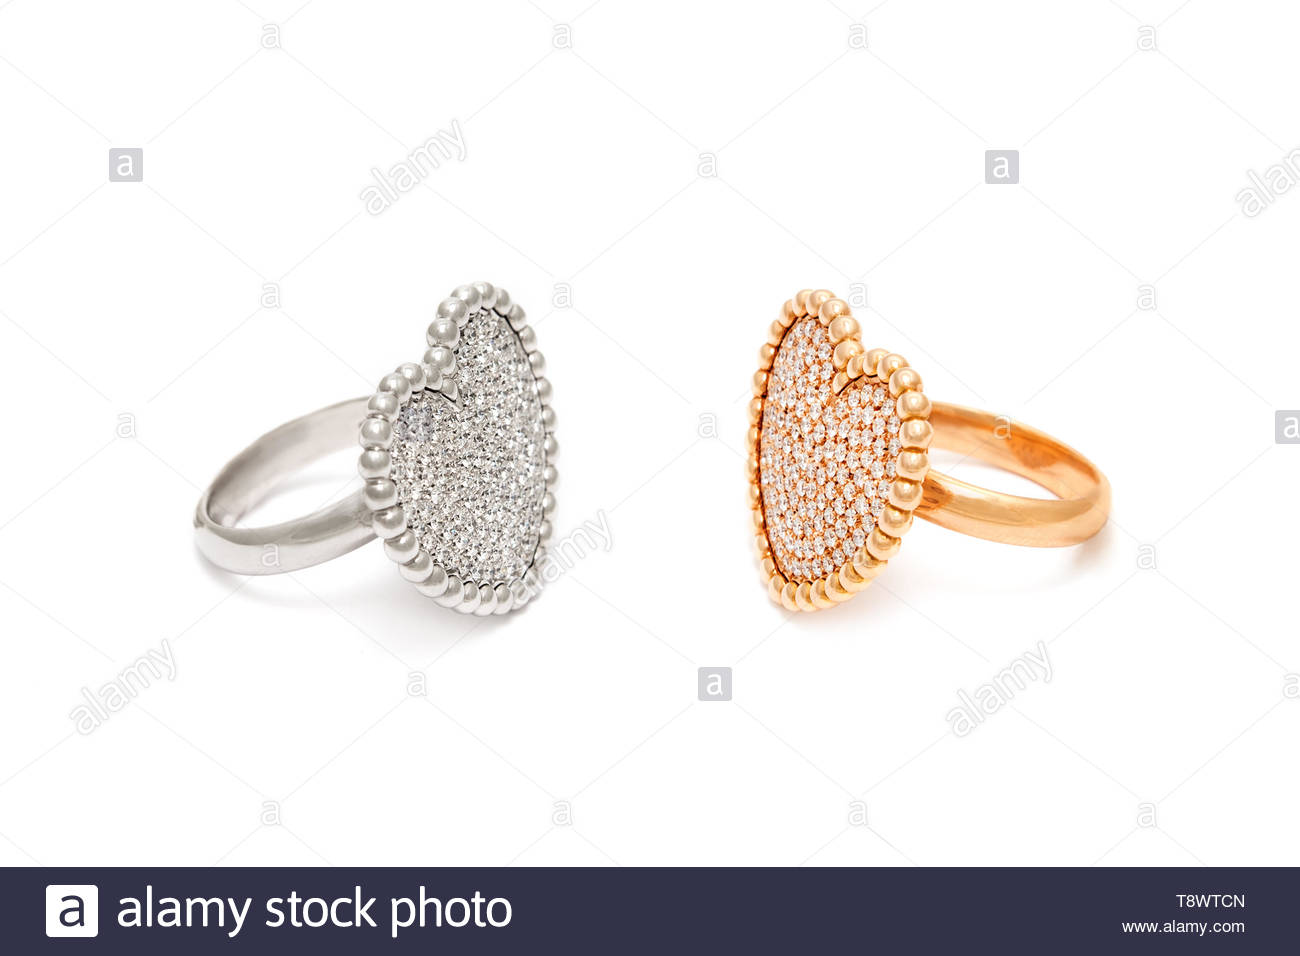 Diamond Rings Isolated On White Background With Diamonds In